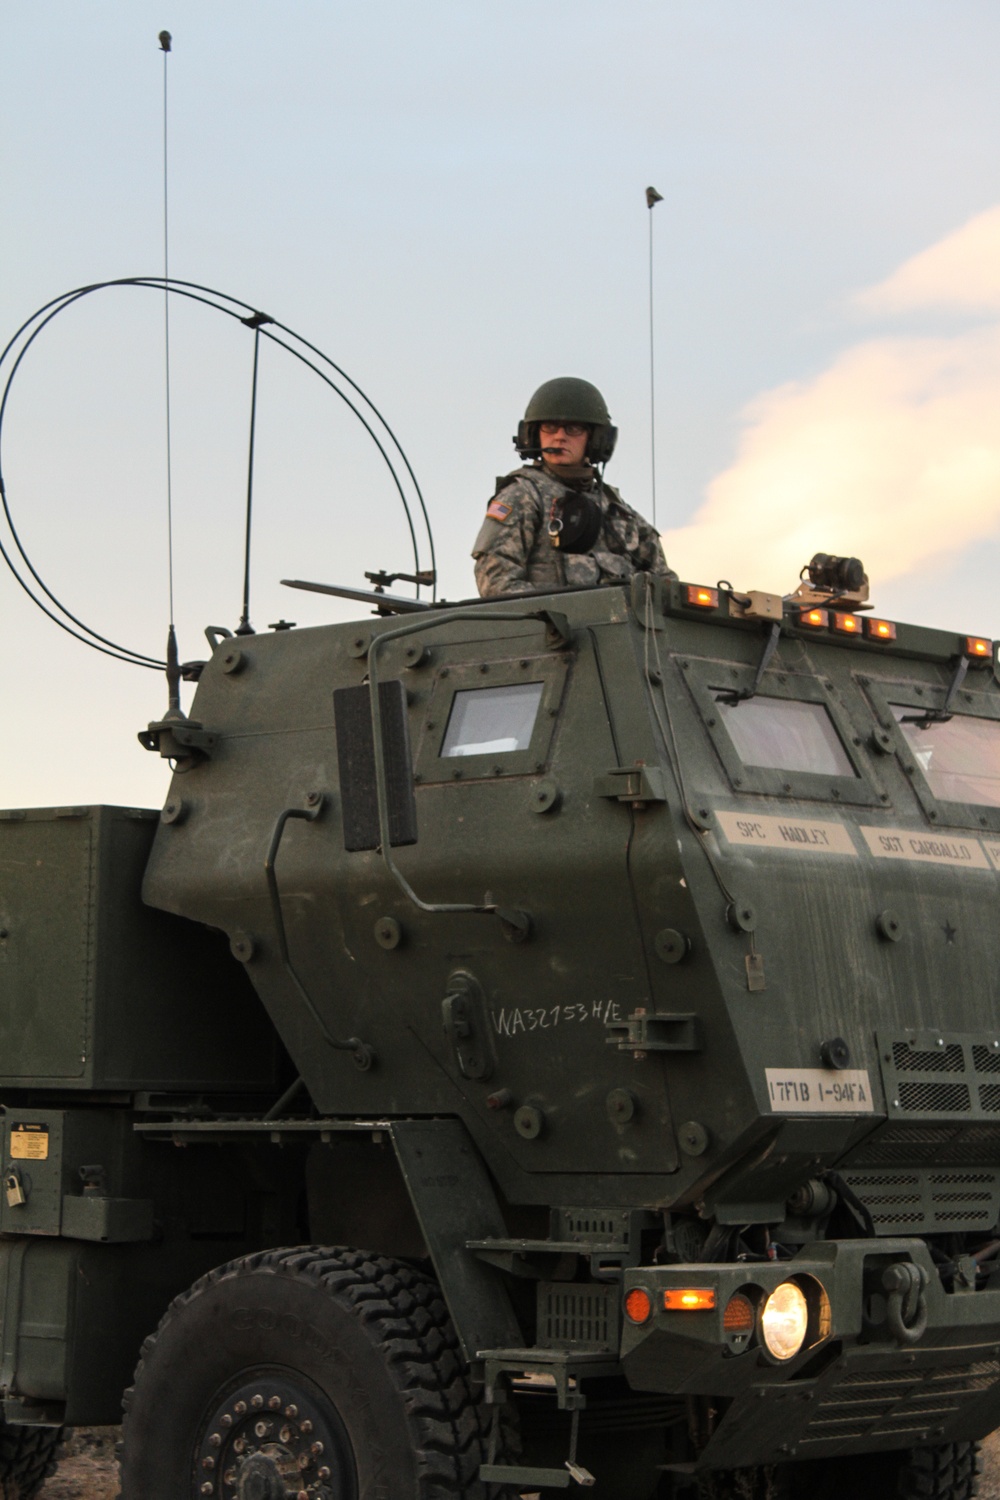 Female soldiers fire rocket system, make Army history